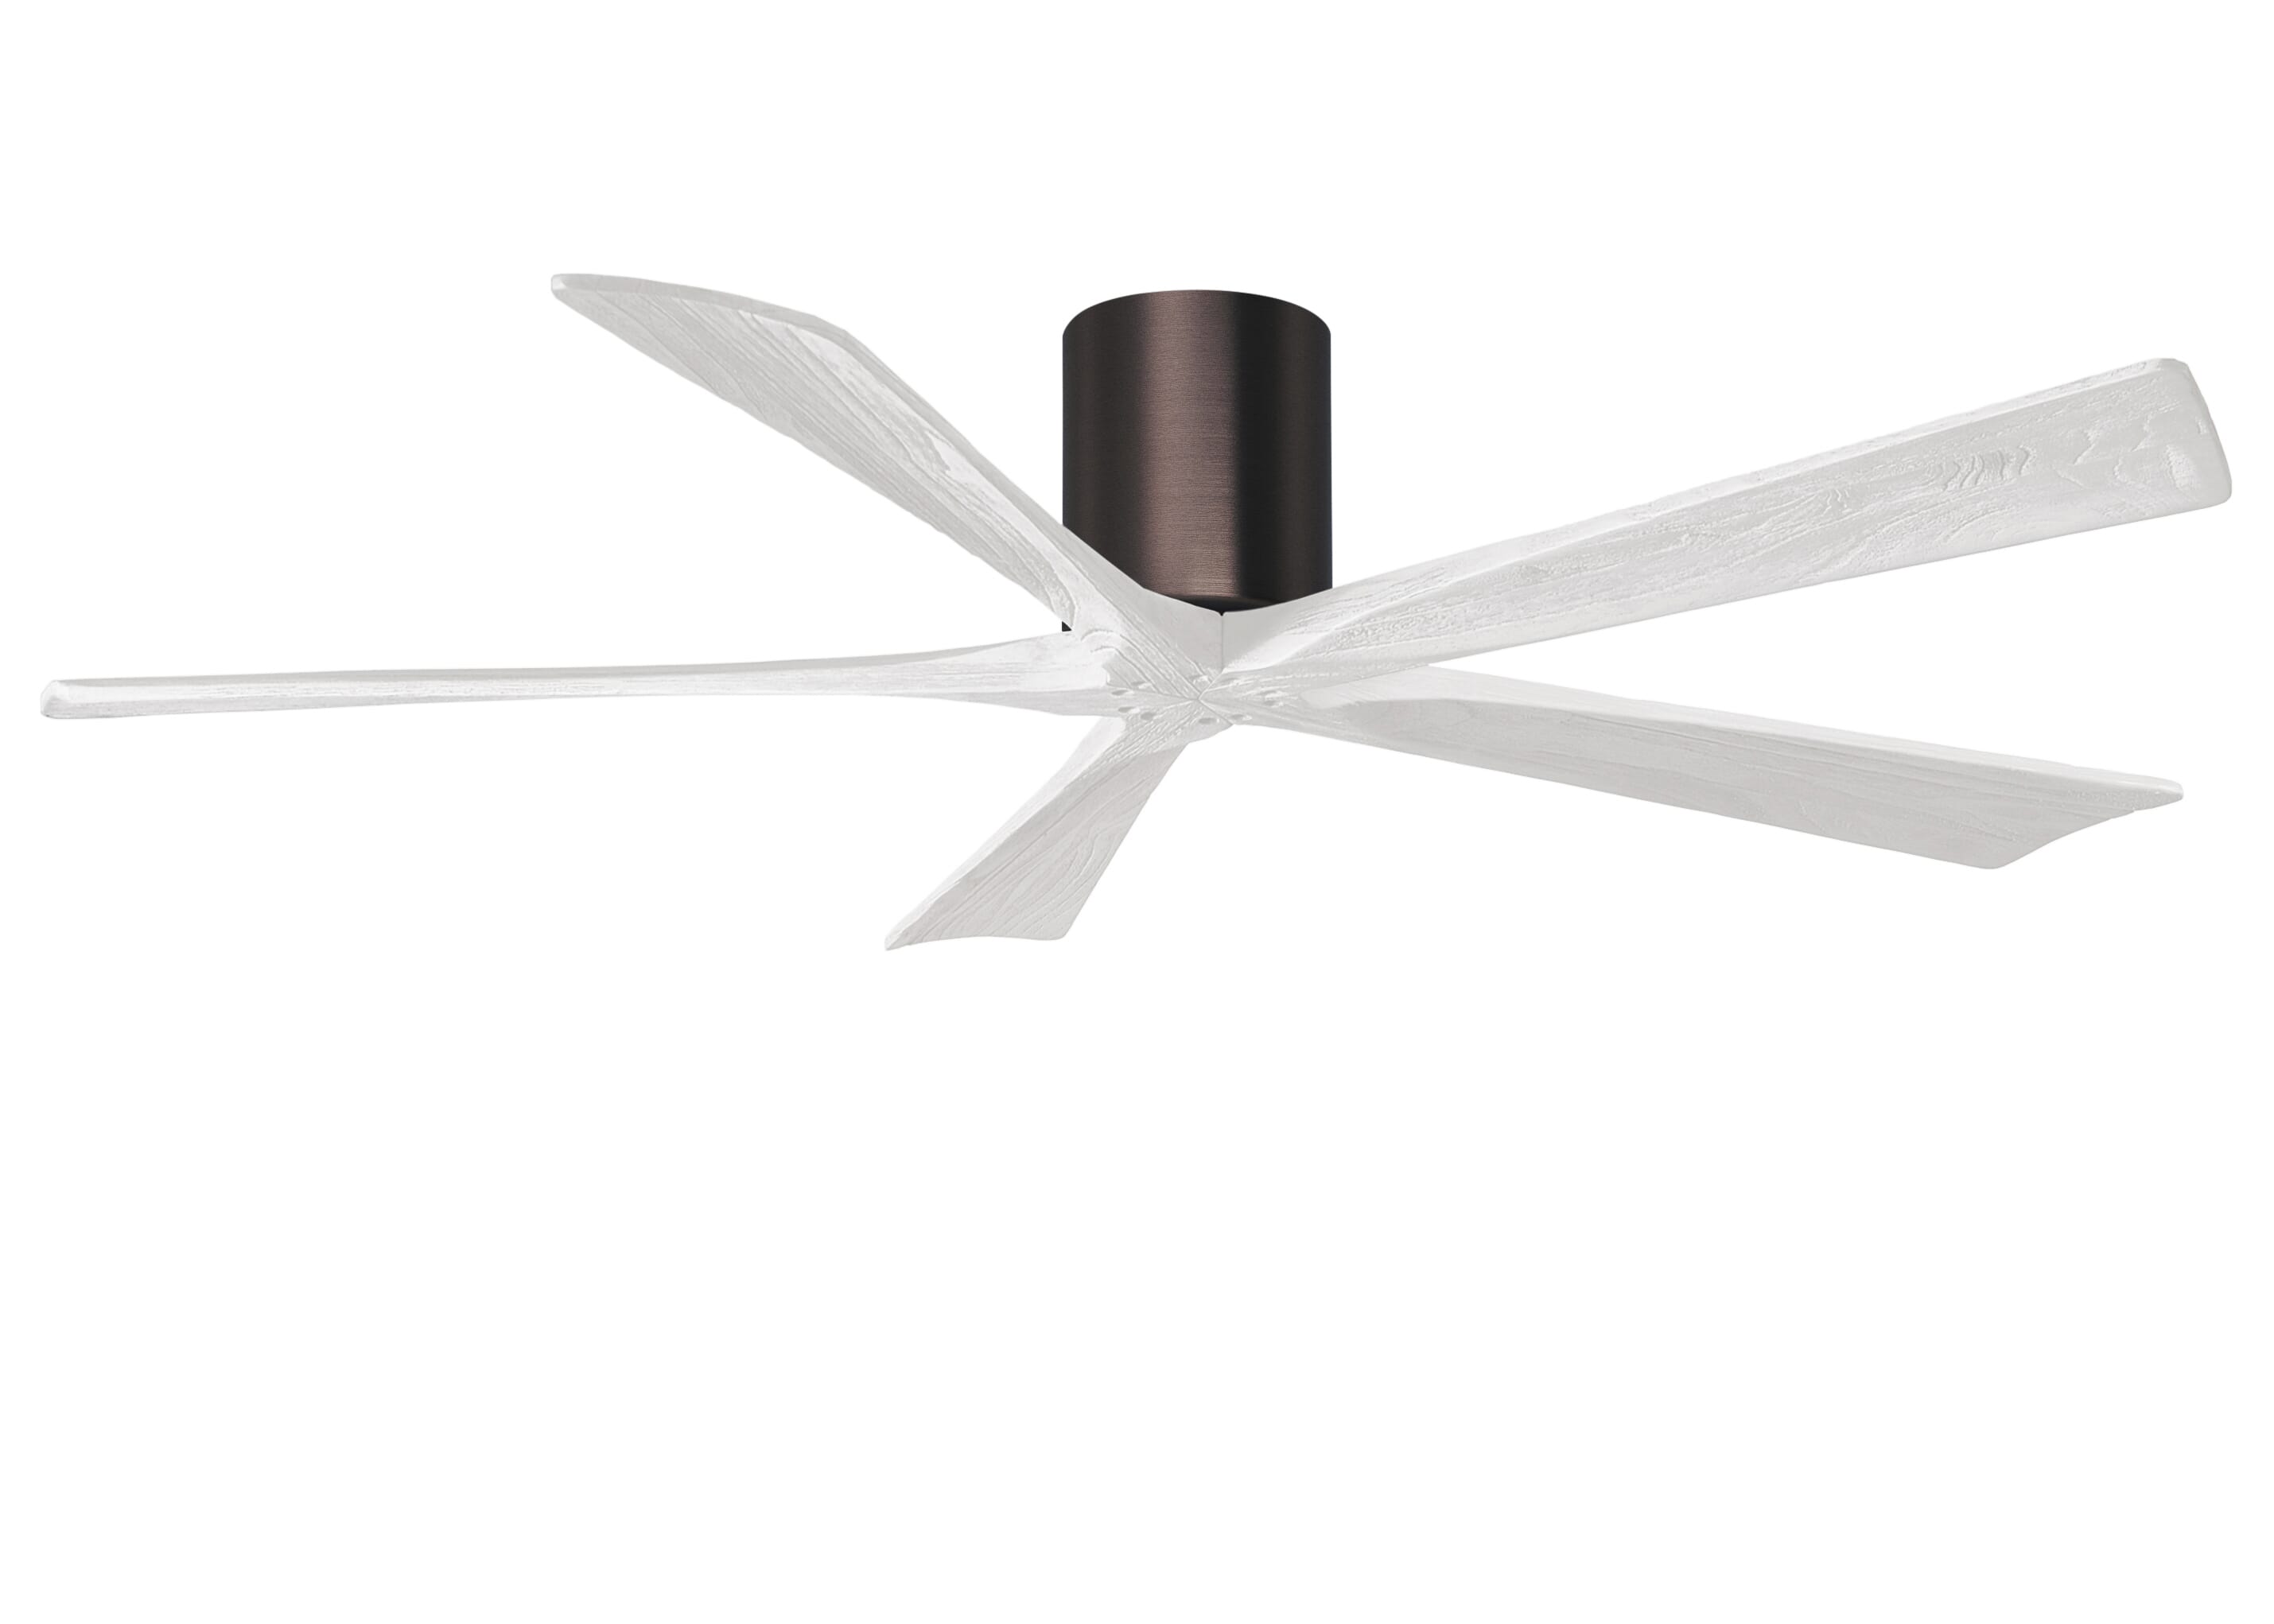 Irene 6-Speed DC 60"" Ceiling Fan in Brushed Bronze with Matte White blades -  Matthews Fan Company, IR5H-BB-MWH-60